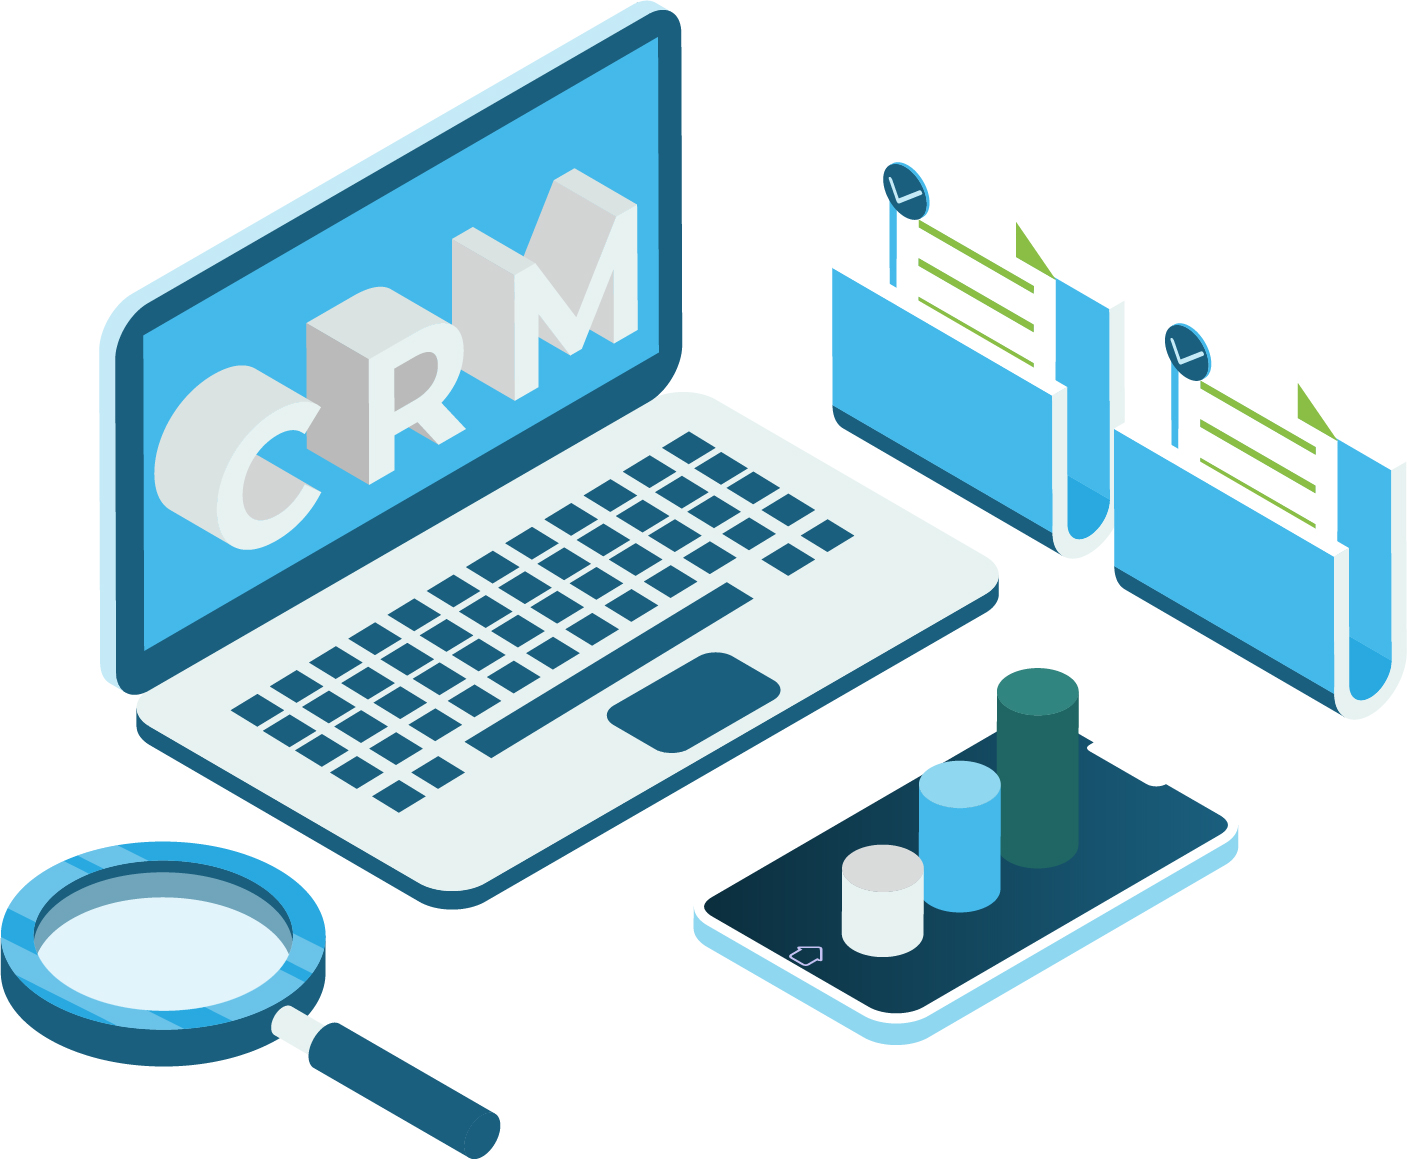 Perform optimum CRM testing and have your SAP CRM system operate effortlessly